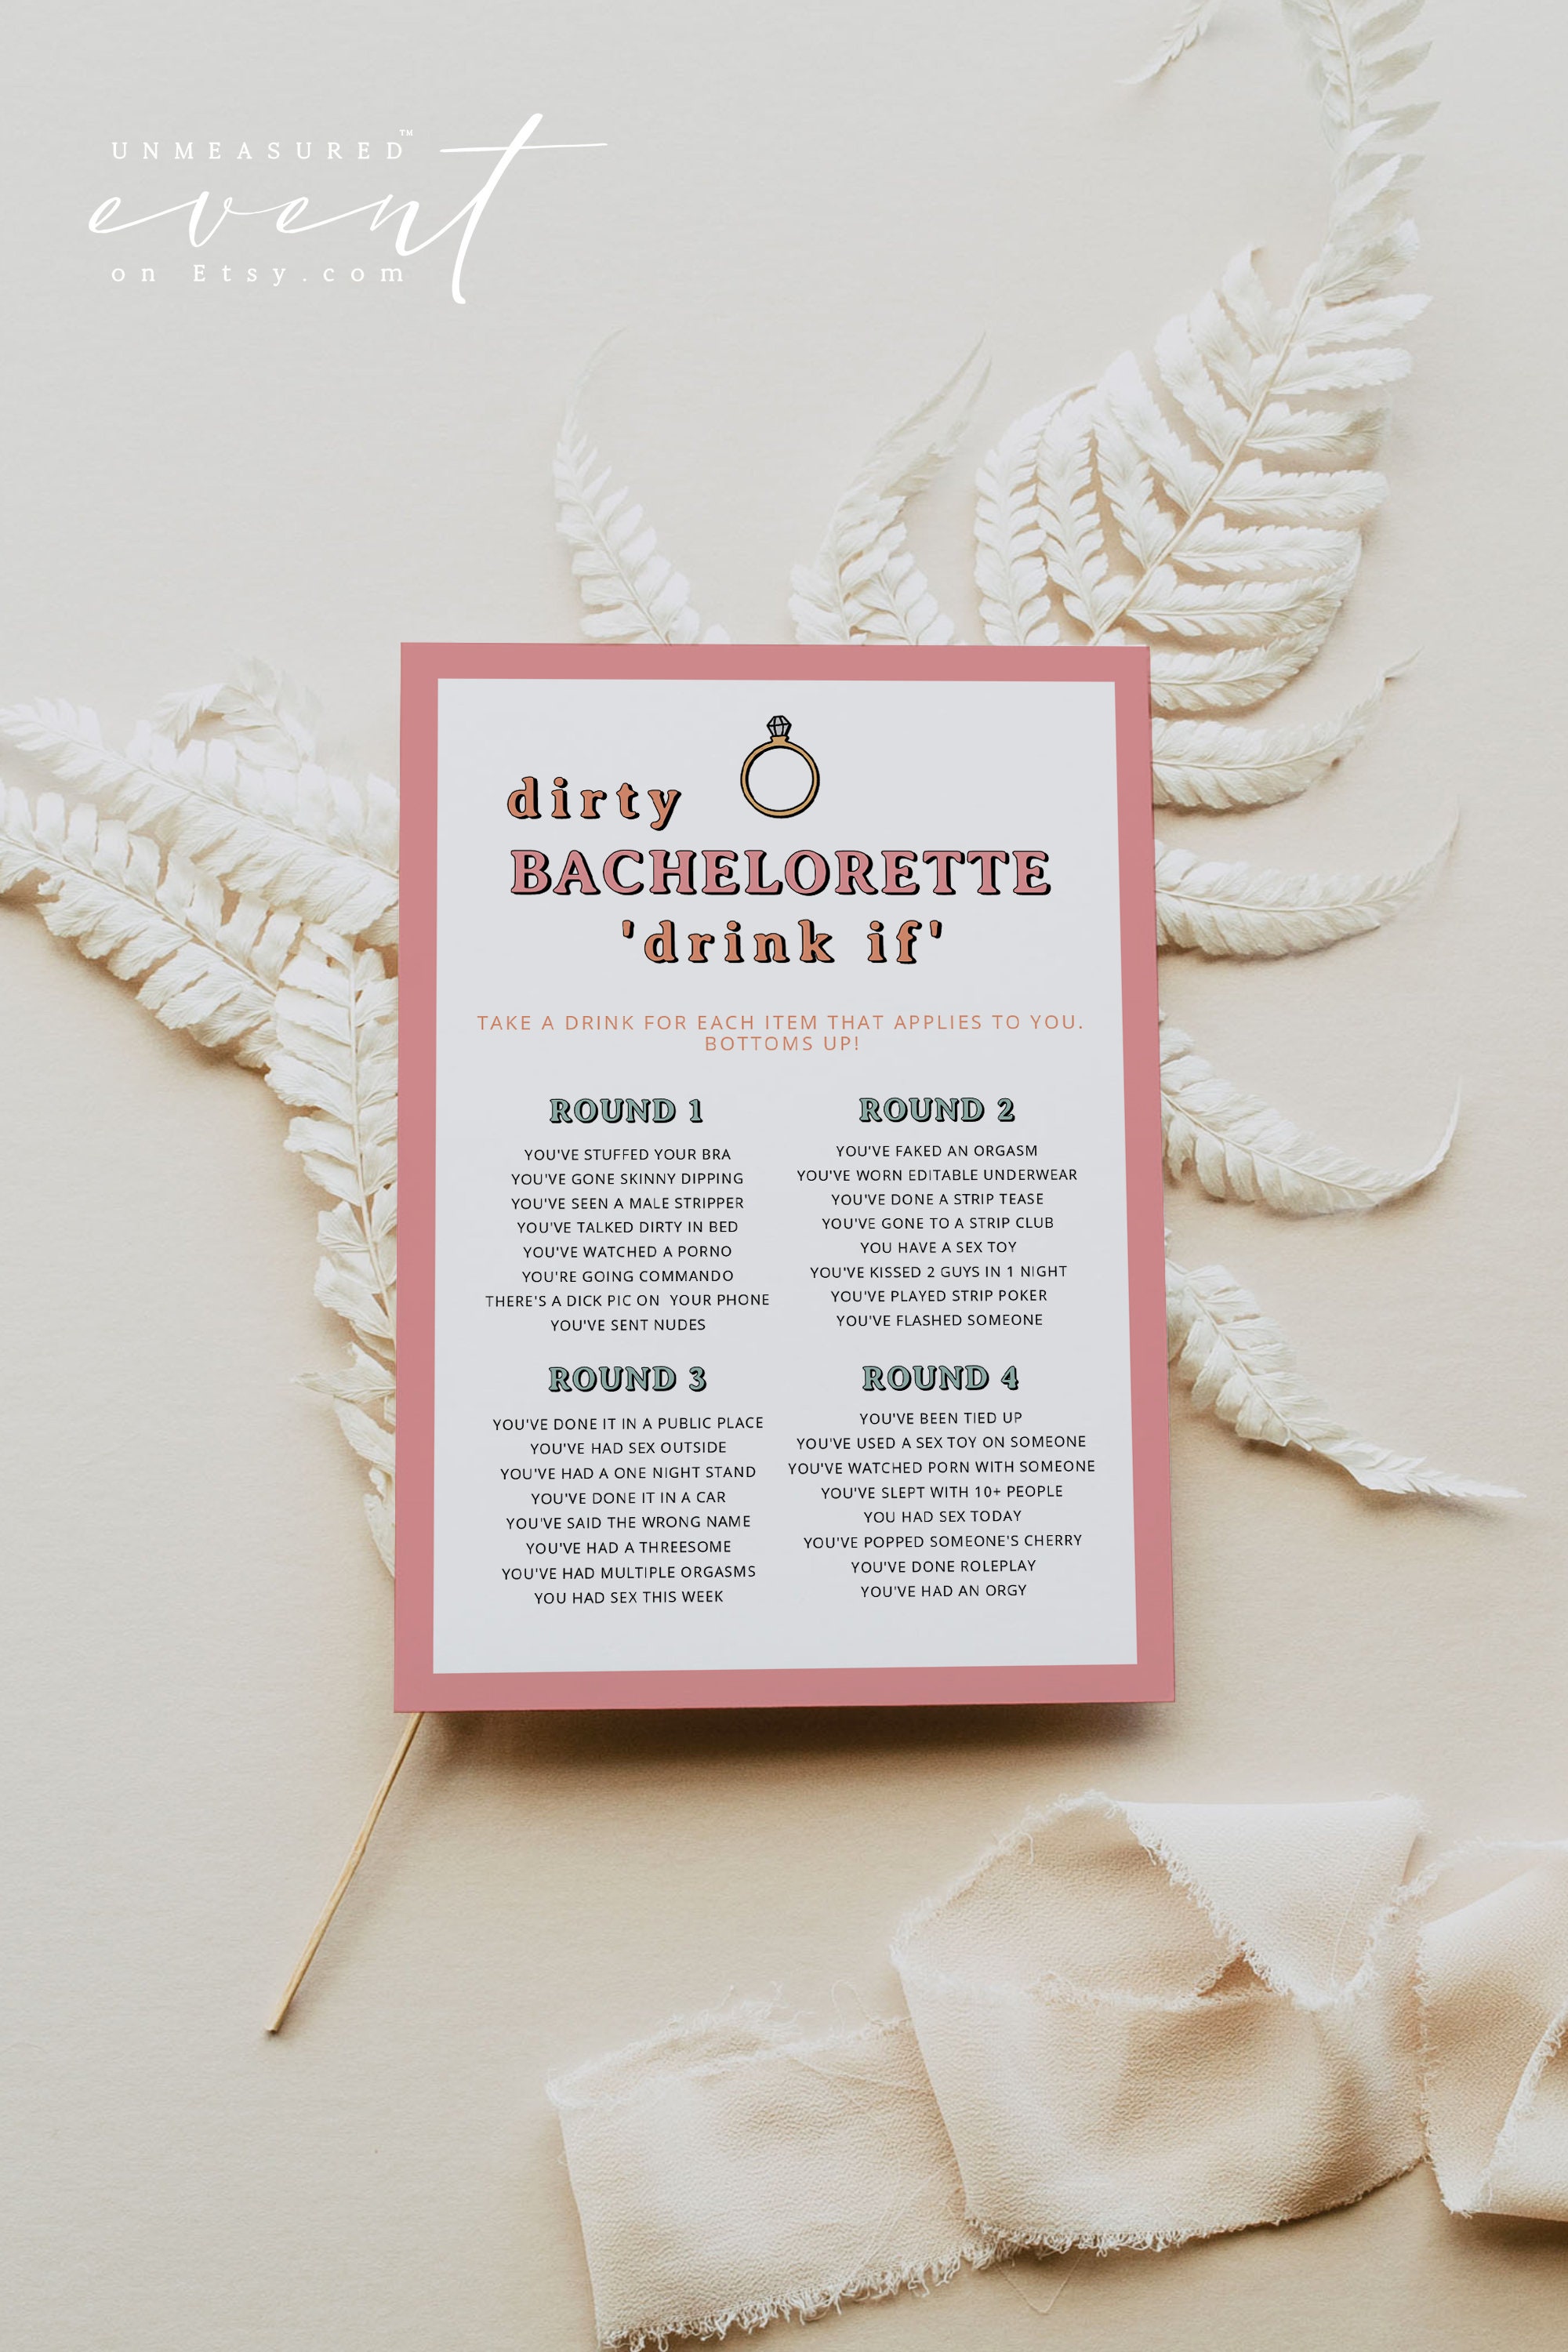 JEAN Dirty Drink If Bachelorette Game Printable Wife of photo image